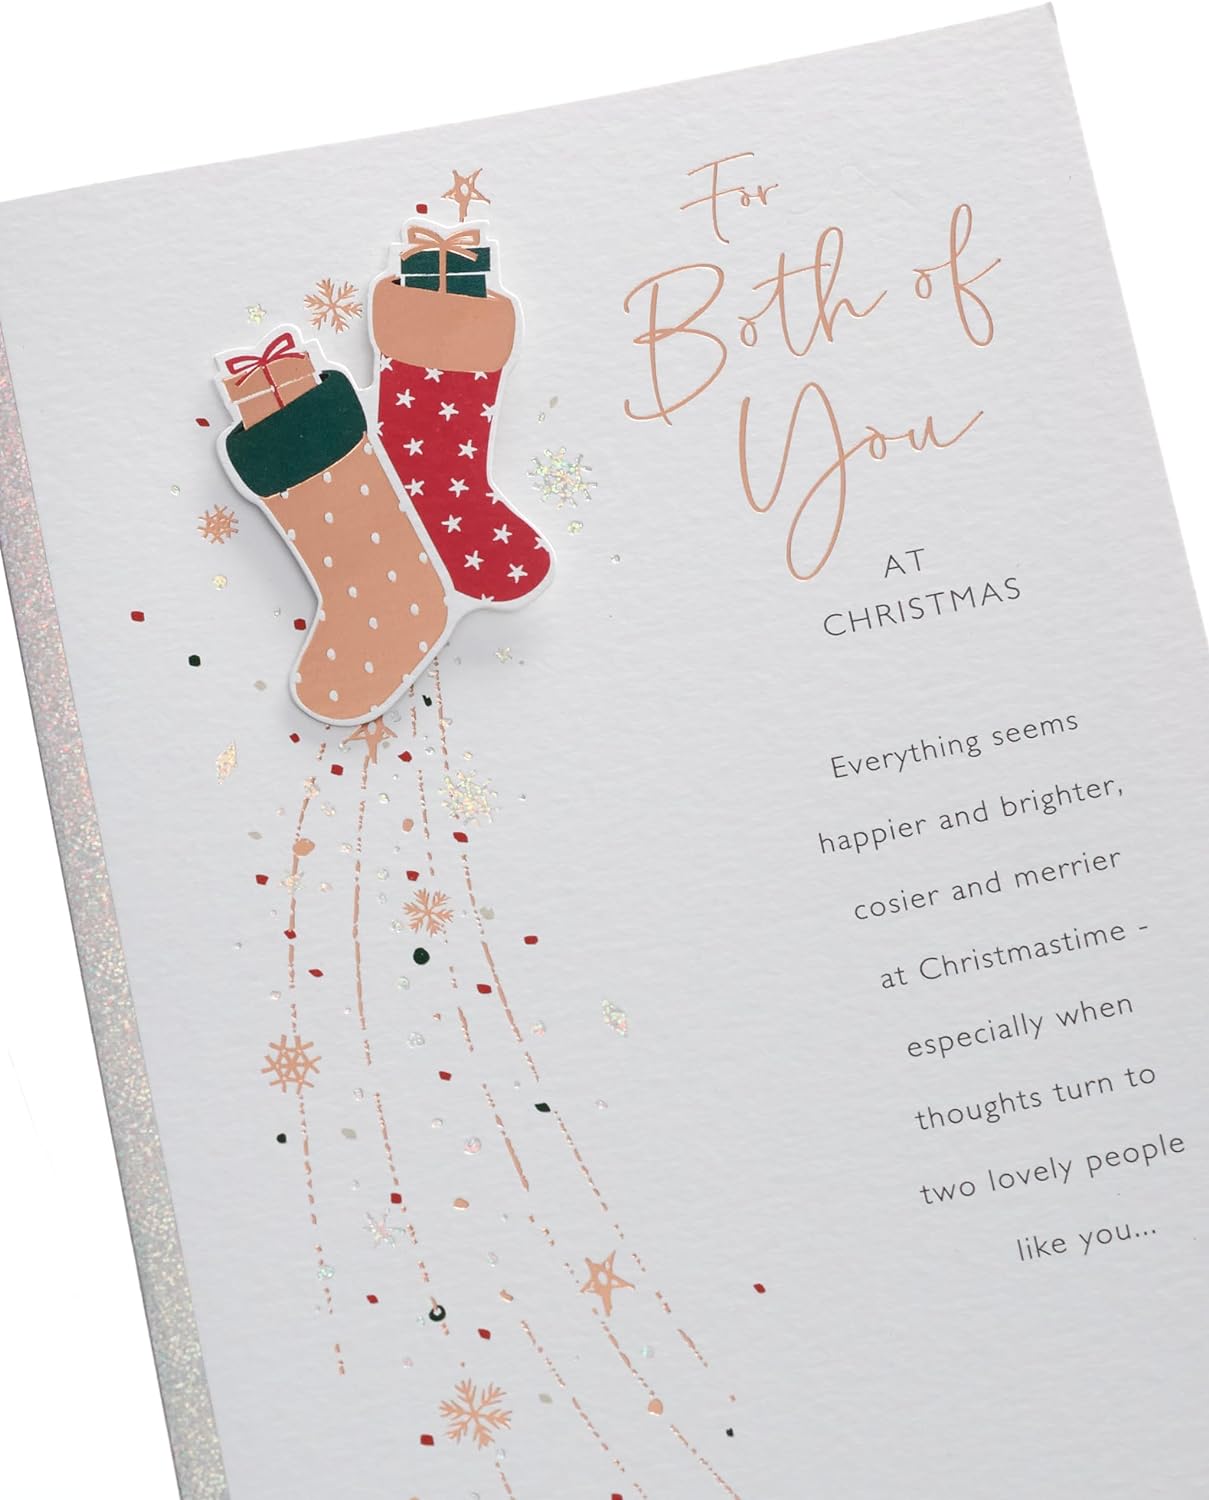 for Both of You Christmas Card Stockings Design